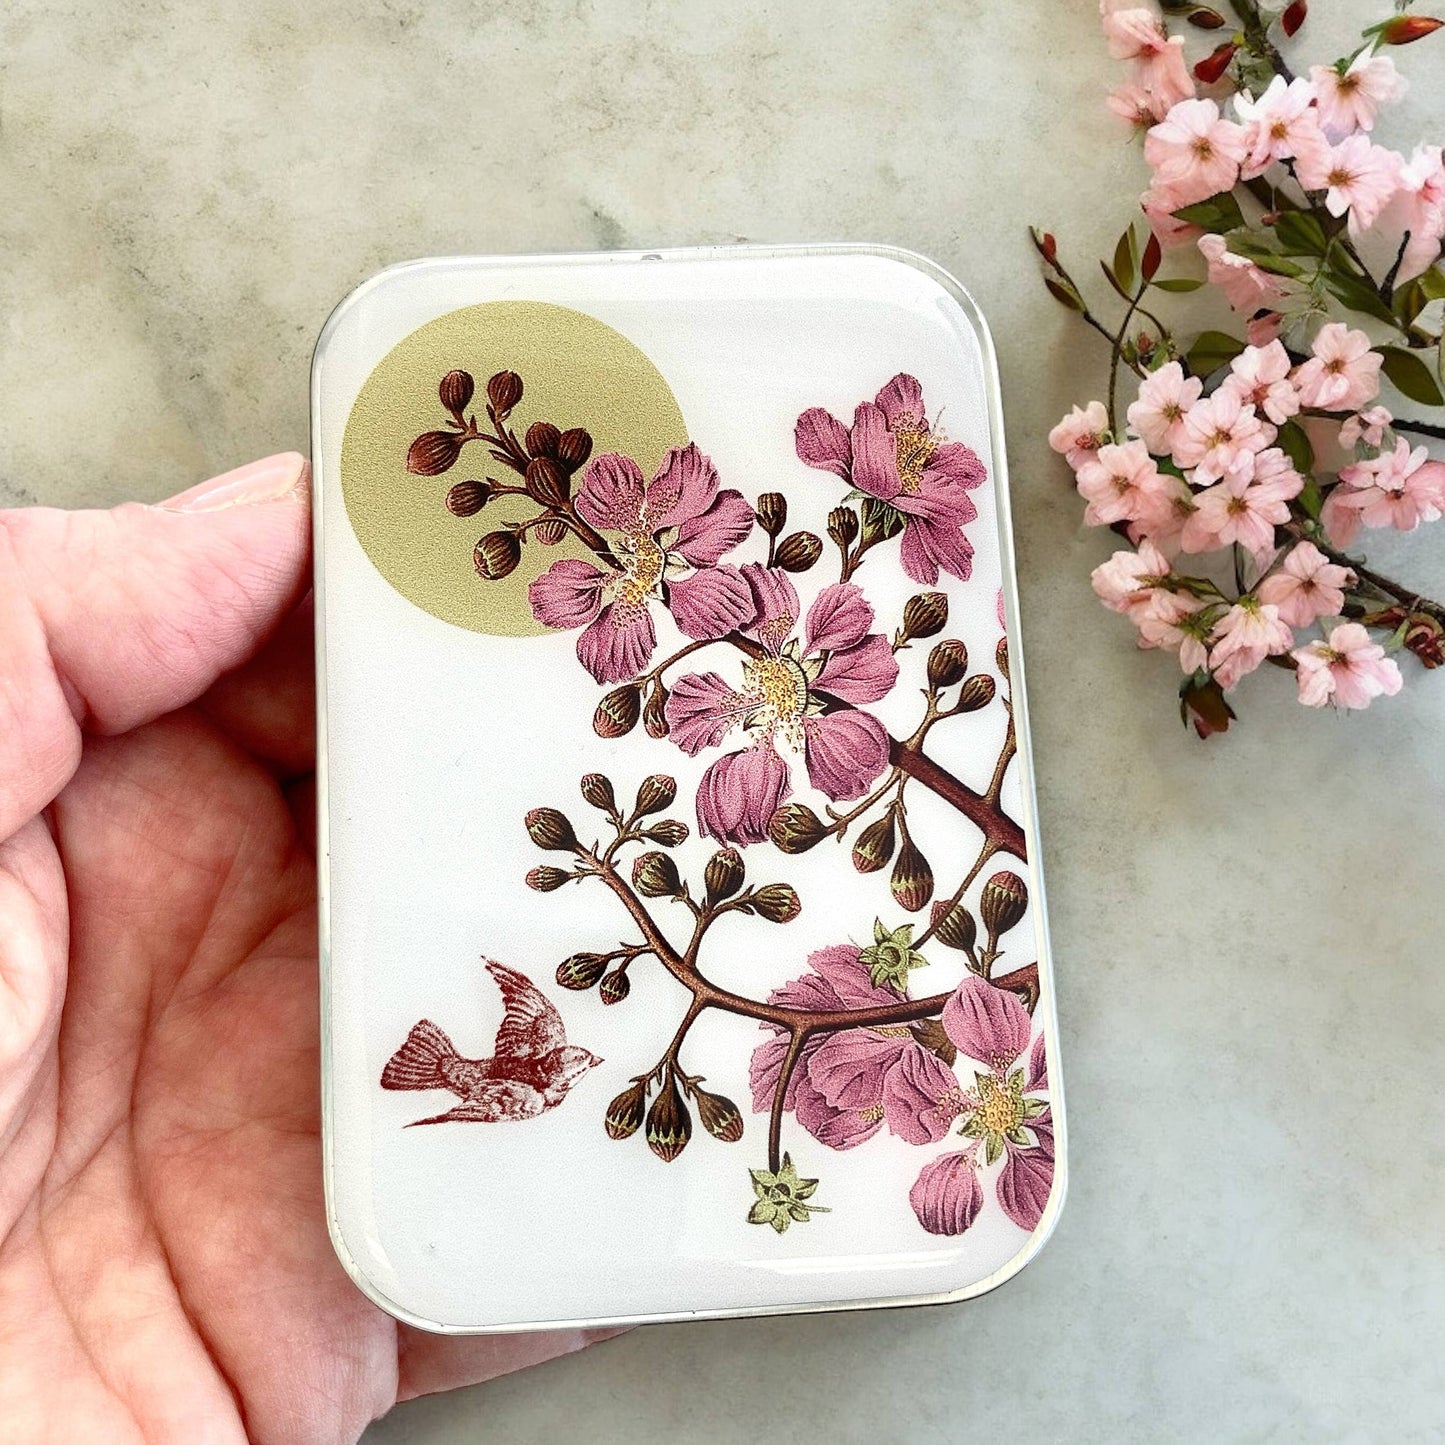 Cherry Blossom & Swallow Notions tin